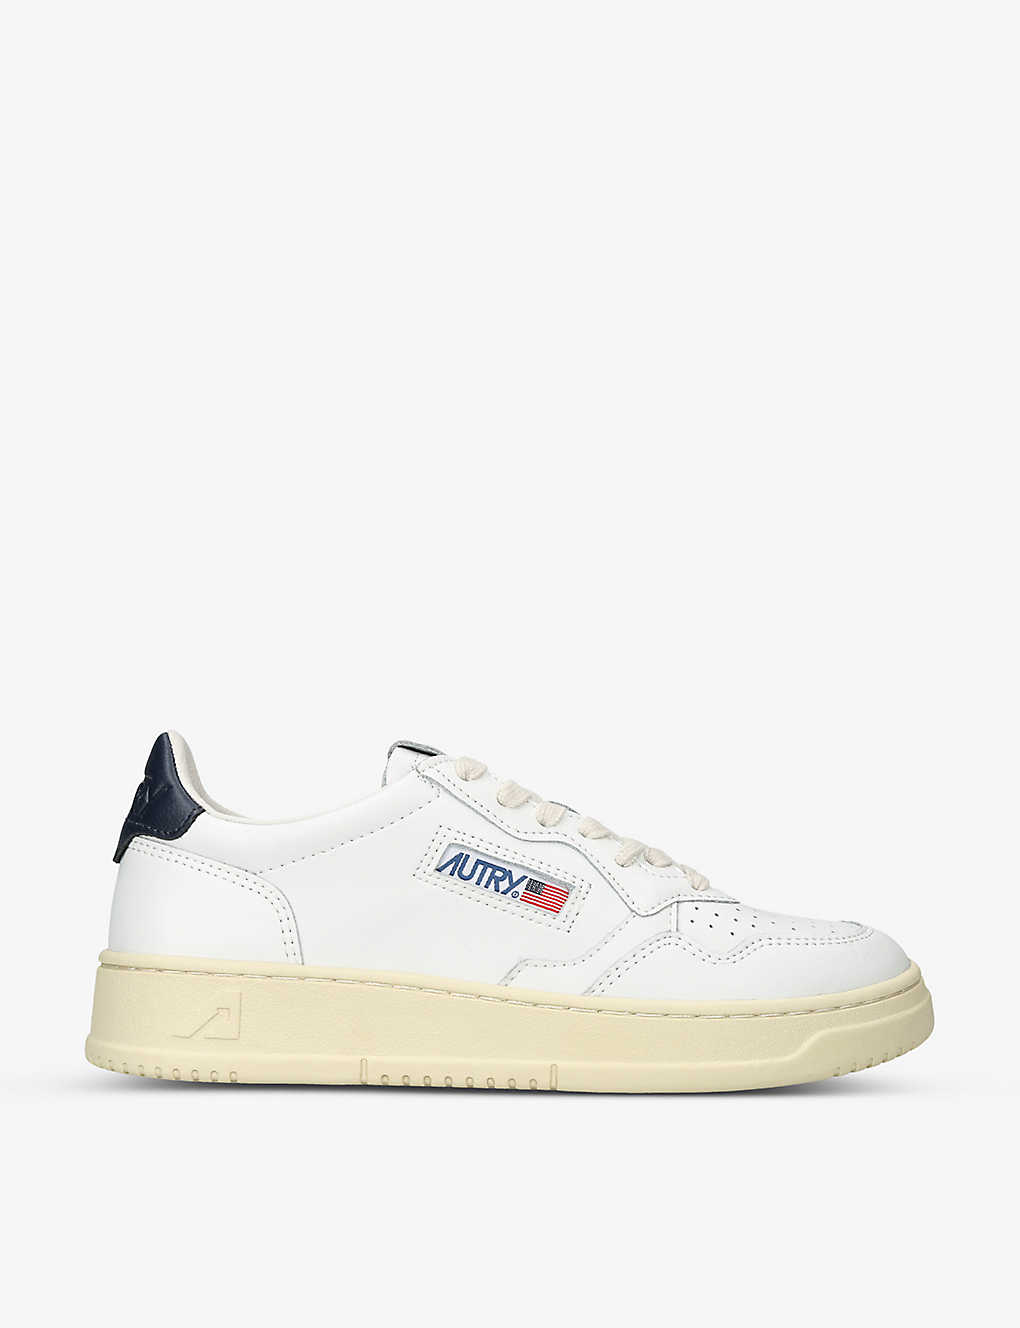 Shop Autry Women's White/oth Medalist Low-top Leather Trainers